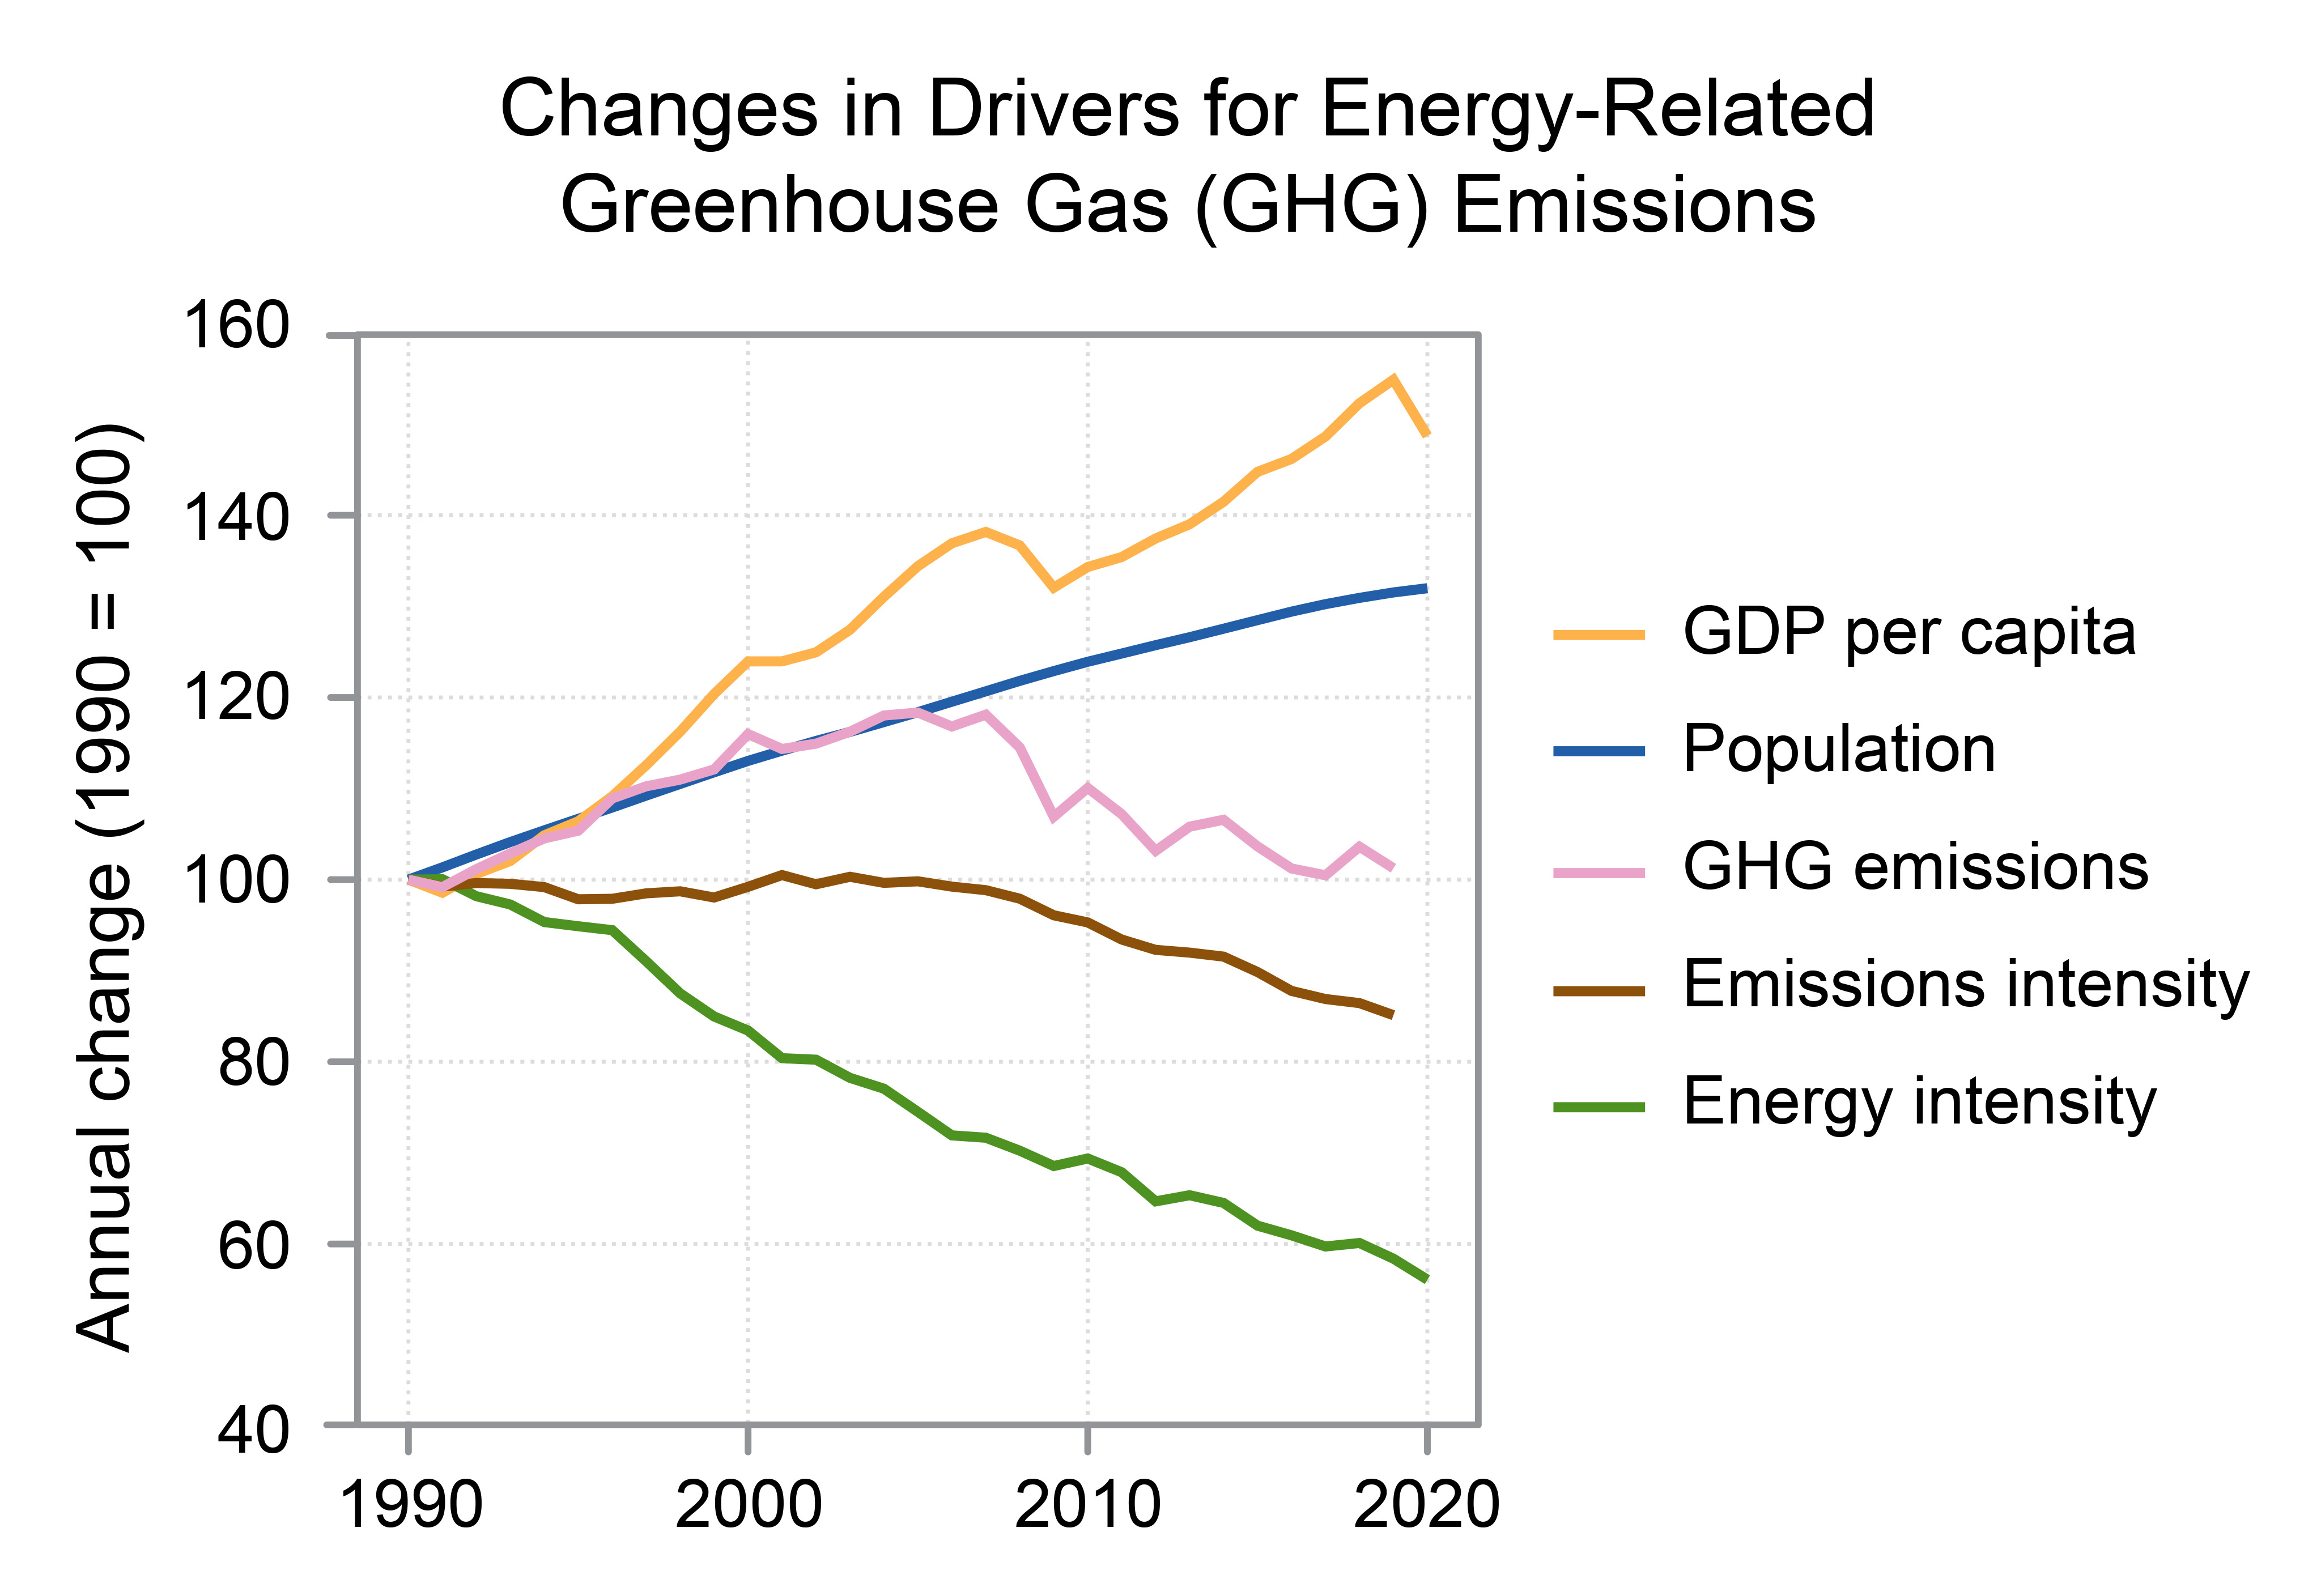 Changes in Drivers for Energy-Related Greenhouse Gas (GHG) Emissions